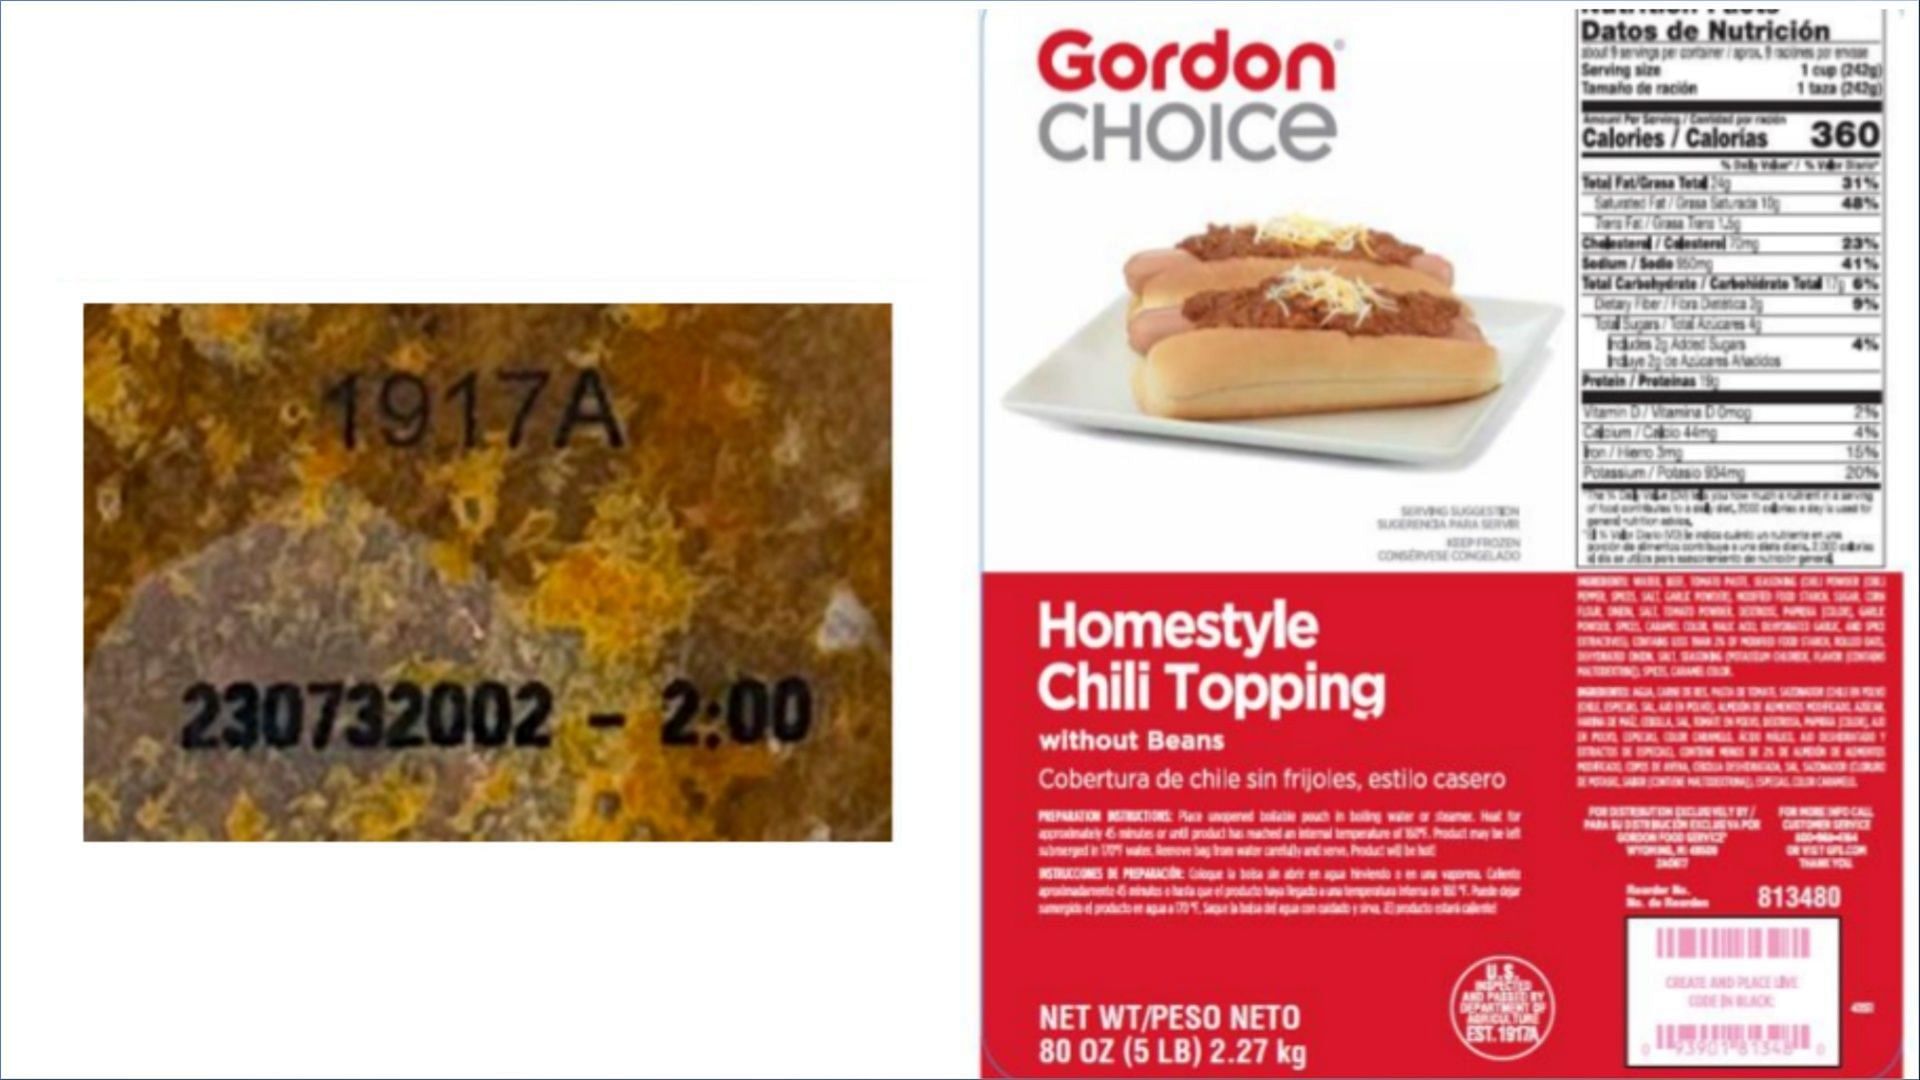 Bags of the recalled Gordon Choice Homestyle Chili Topping products may contain soy-based beef taco filling instead (Image via FSIS)